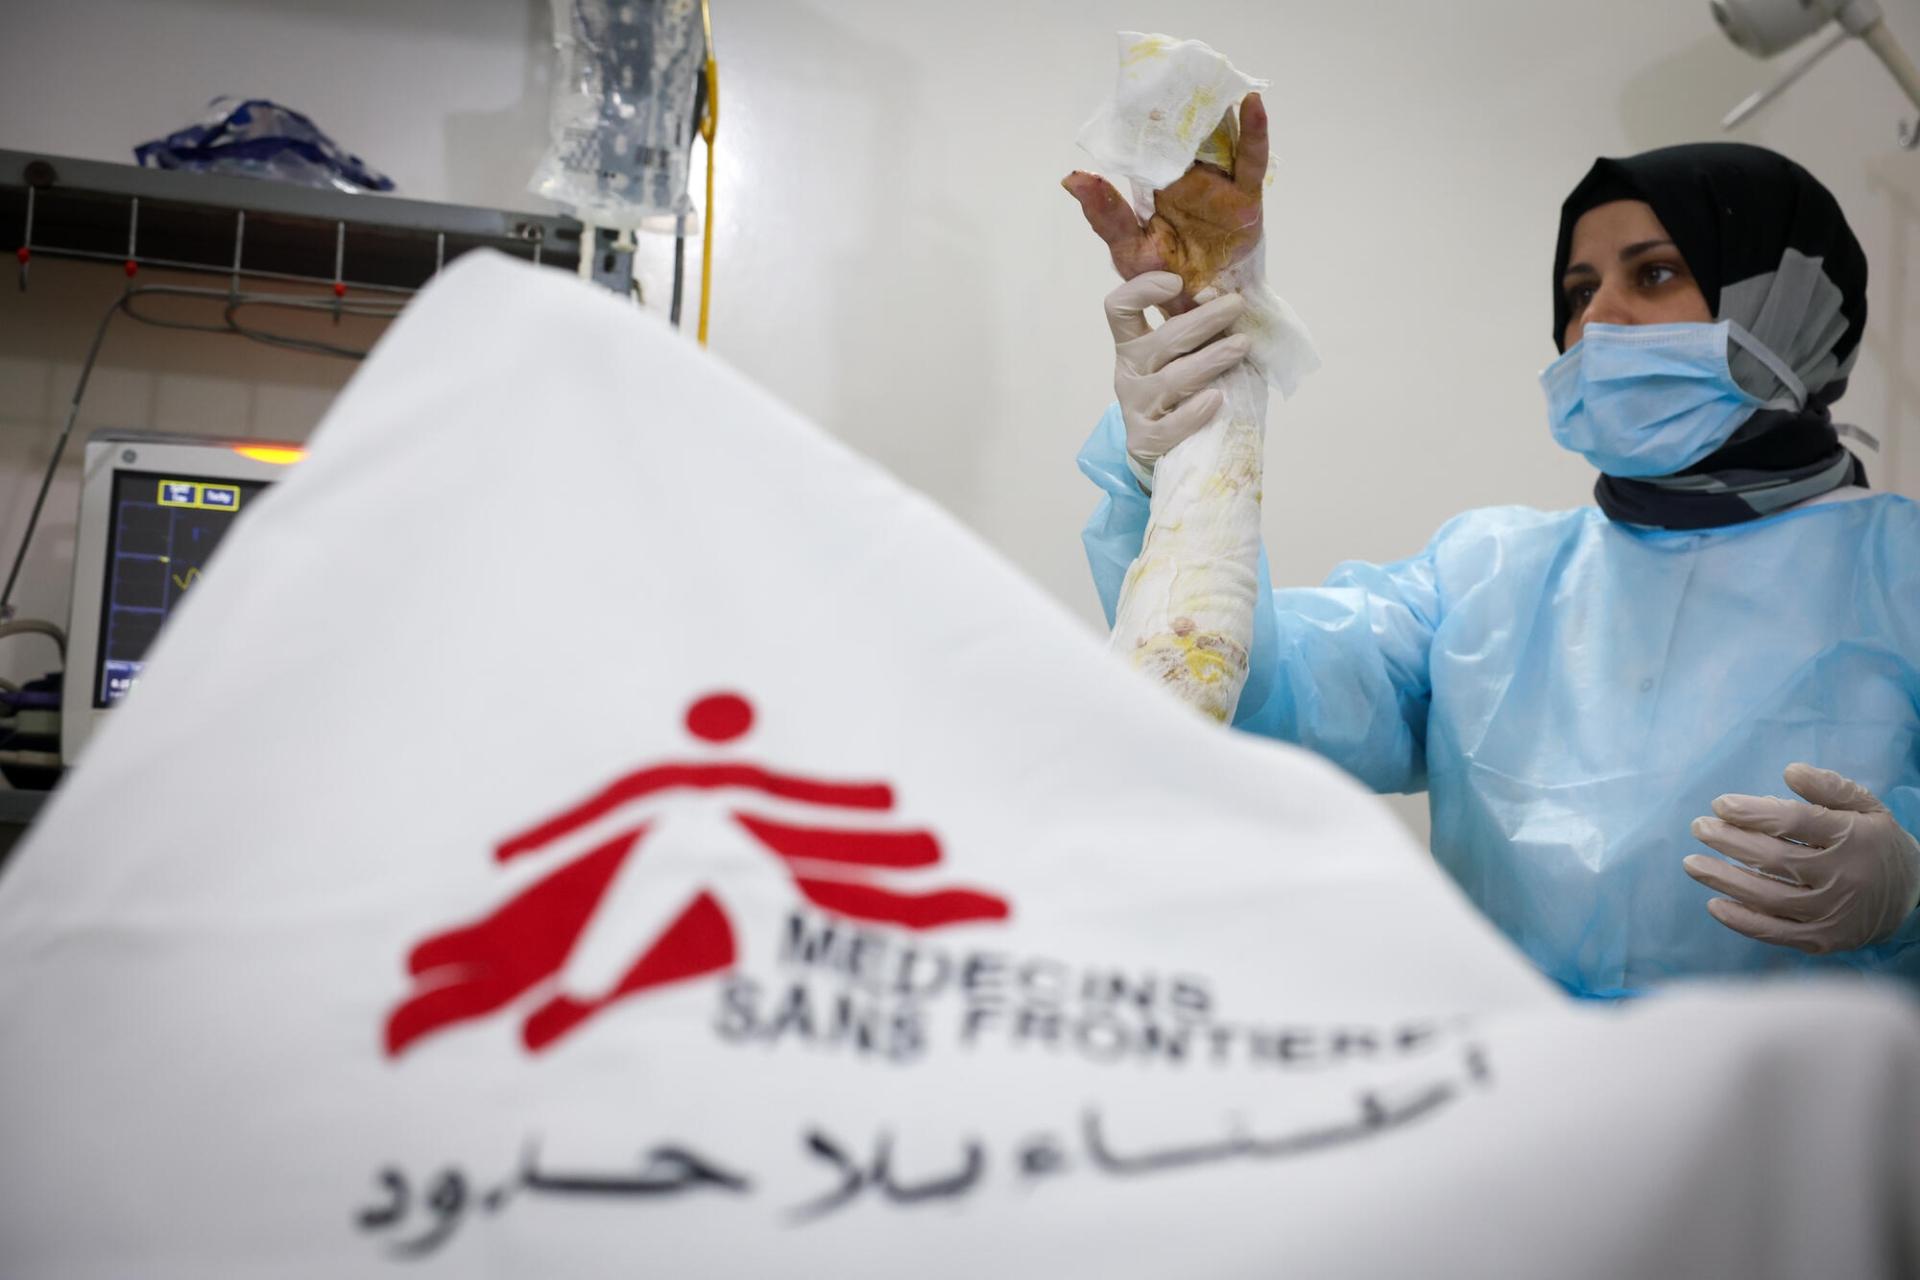 MSF activities in Idlib governorate